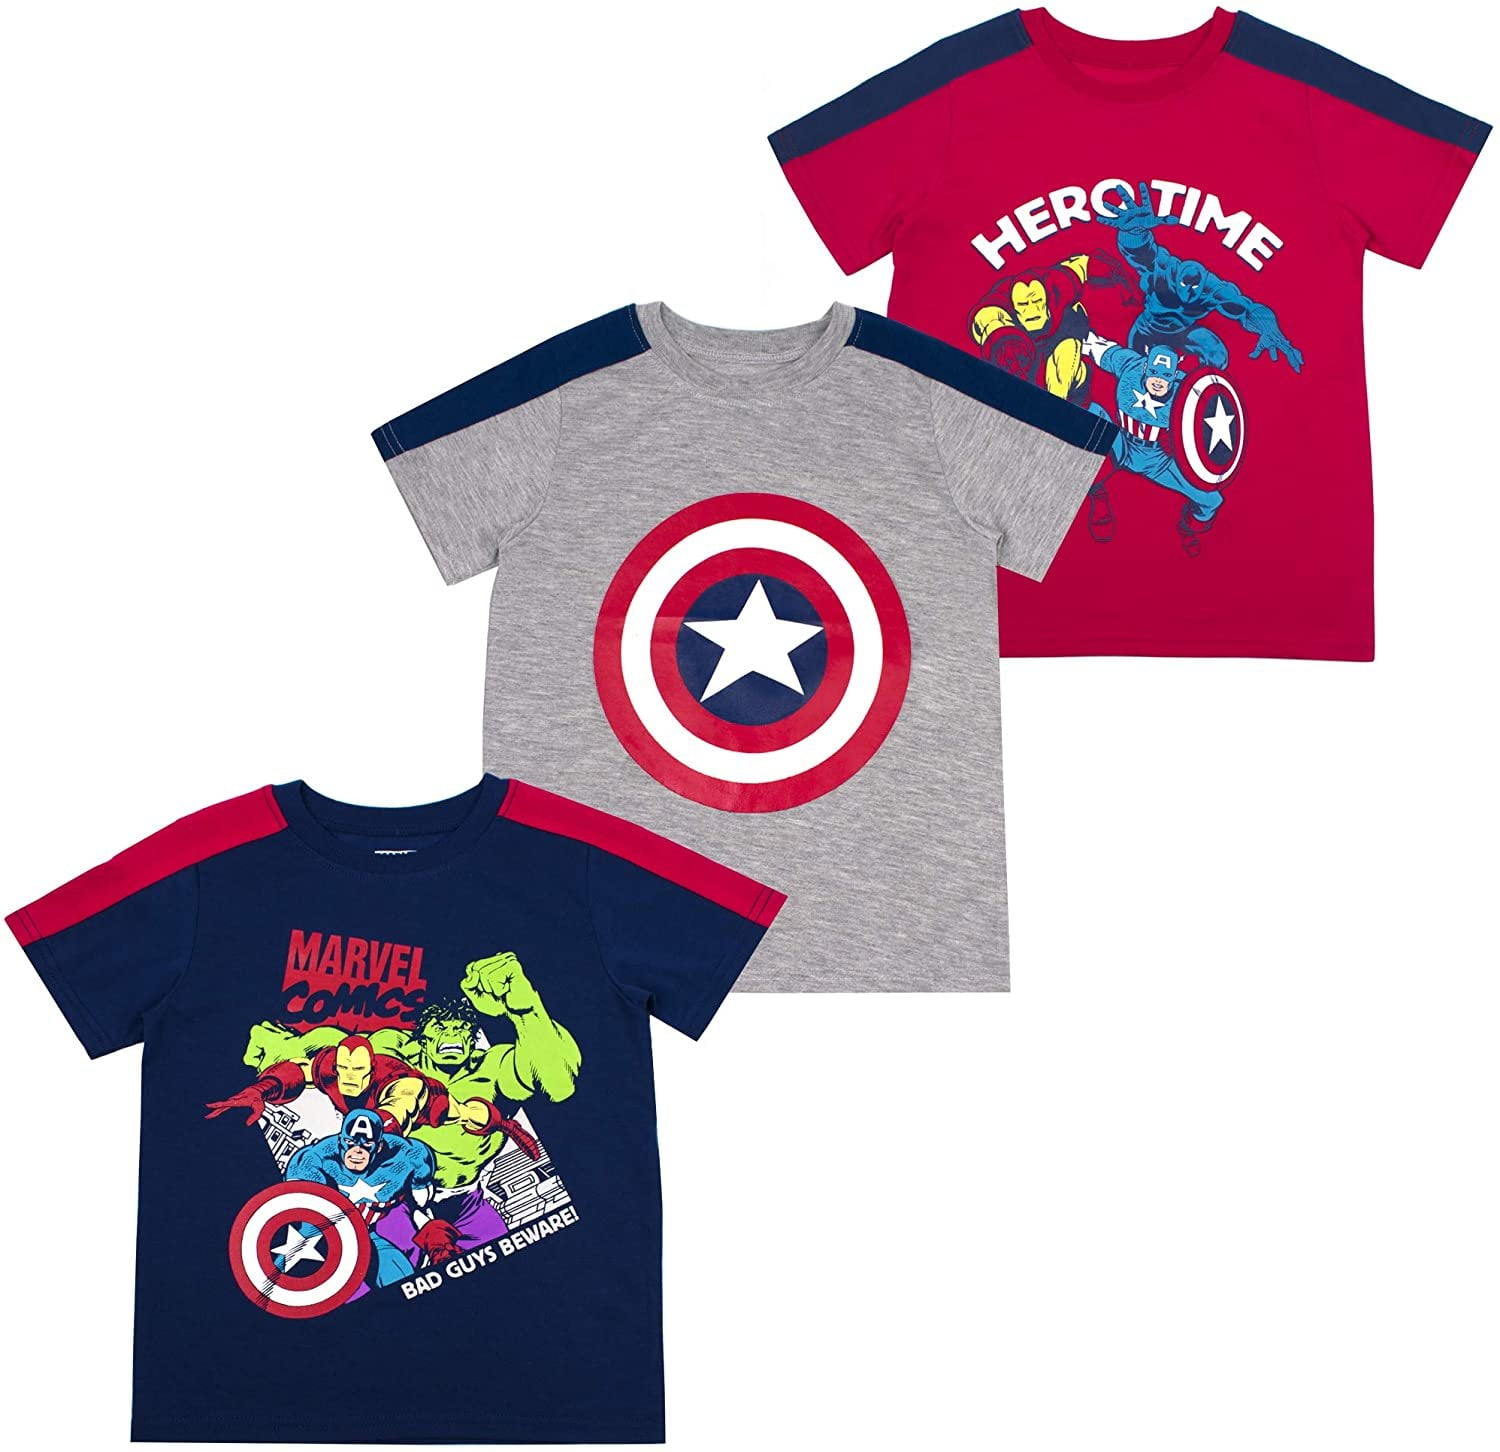 Marvel Avengers and Spider-Man T-Shirt 3 Pack for Boys Boys Characters 3-Pack Bundle of Tees 